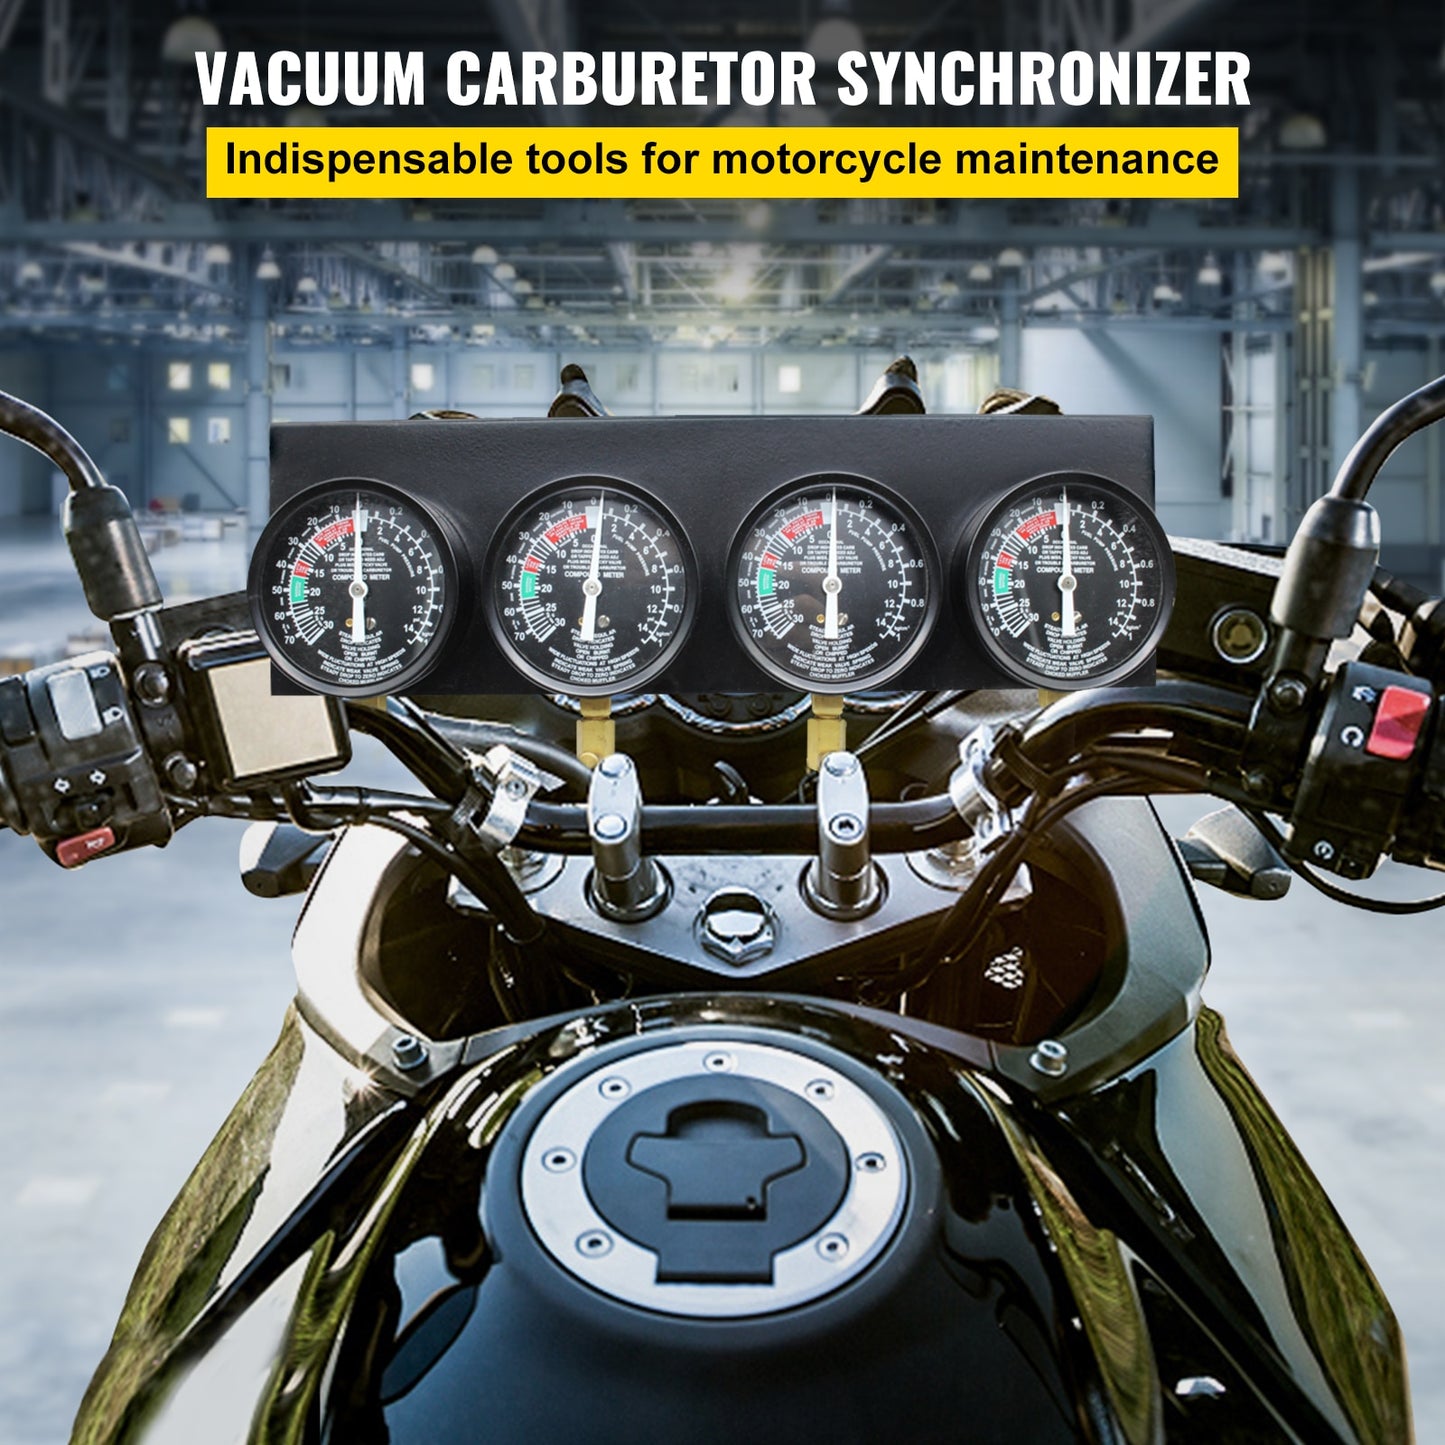 4-Gauge Carburetor Synchronizer Kit: Achieve Perfect Fuel Balance and Performance Tuning for Your Motorcycle with Precision and Ease!